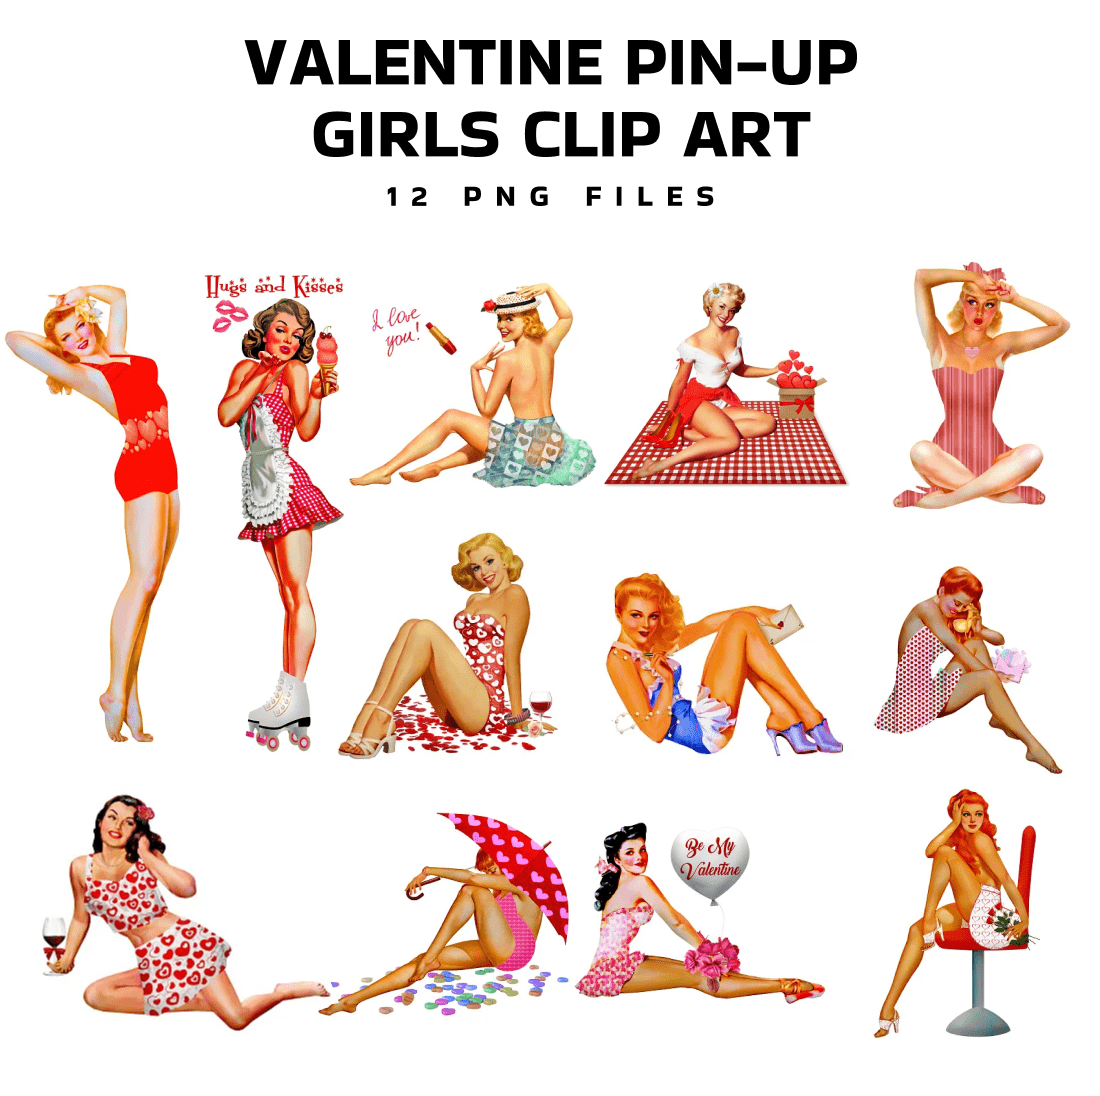 Valentine Pin-Up Girls Clip Art - main image preview.